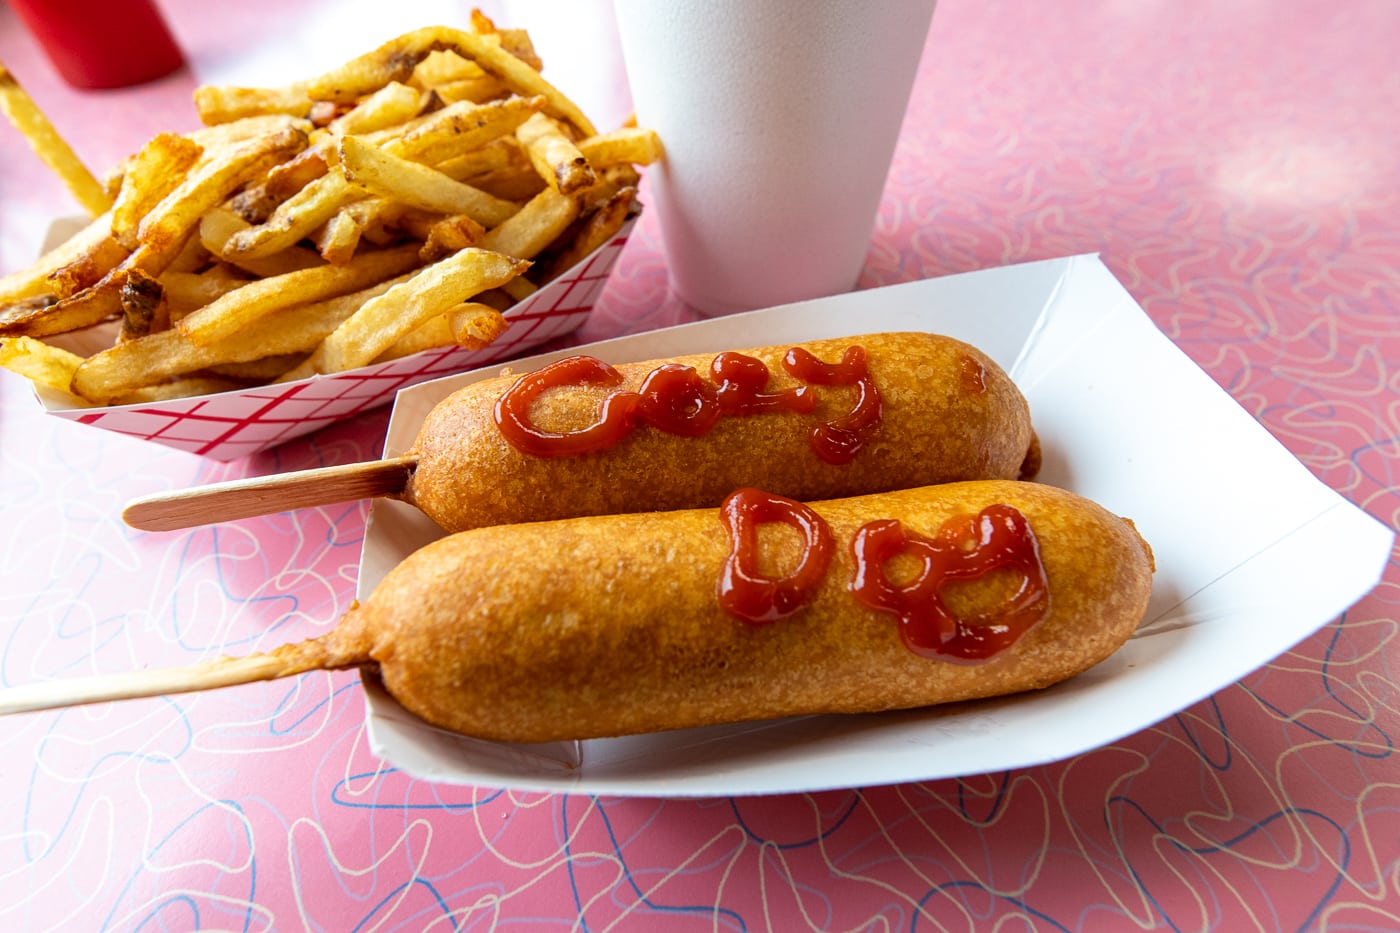 Corn dog and fries at Cozy Dog Drive In in Springfield, Illinois on Route 66